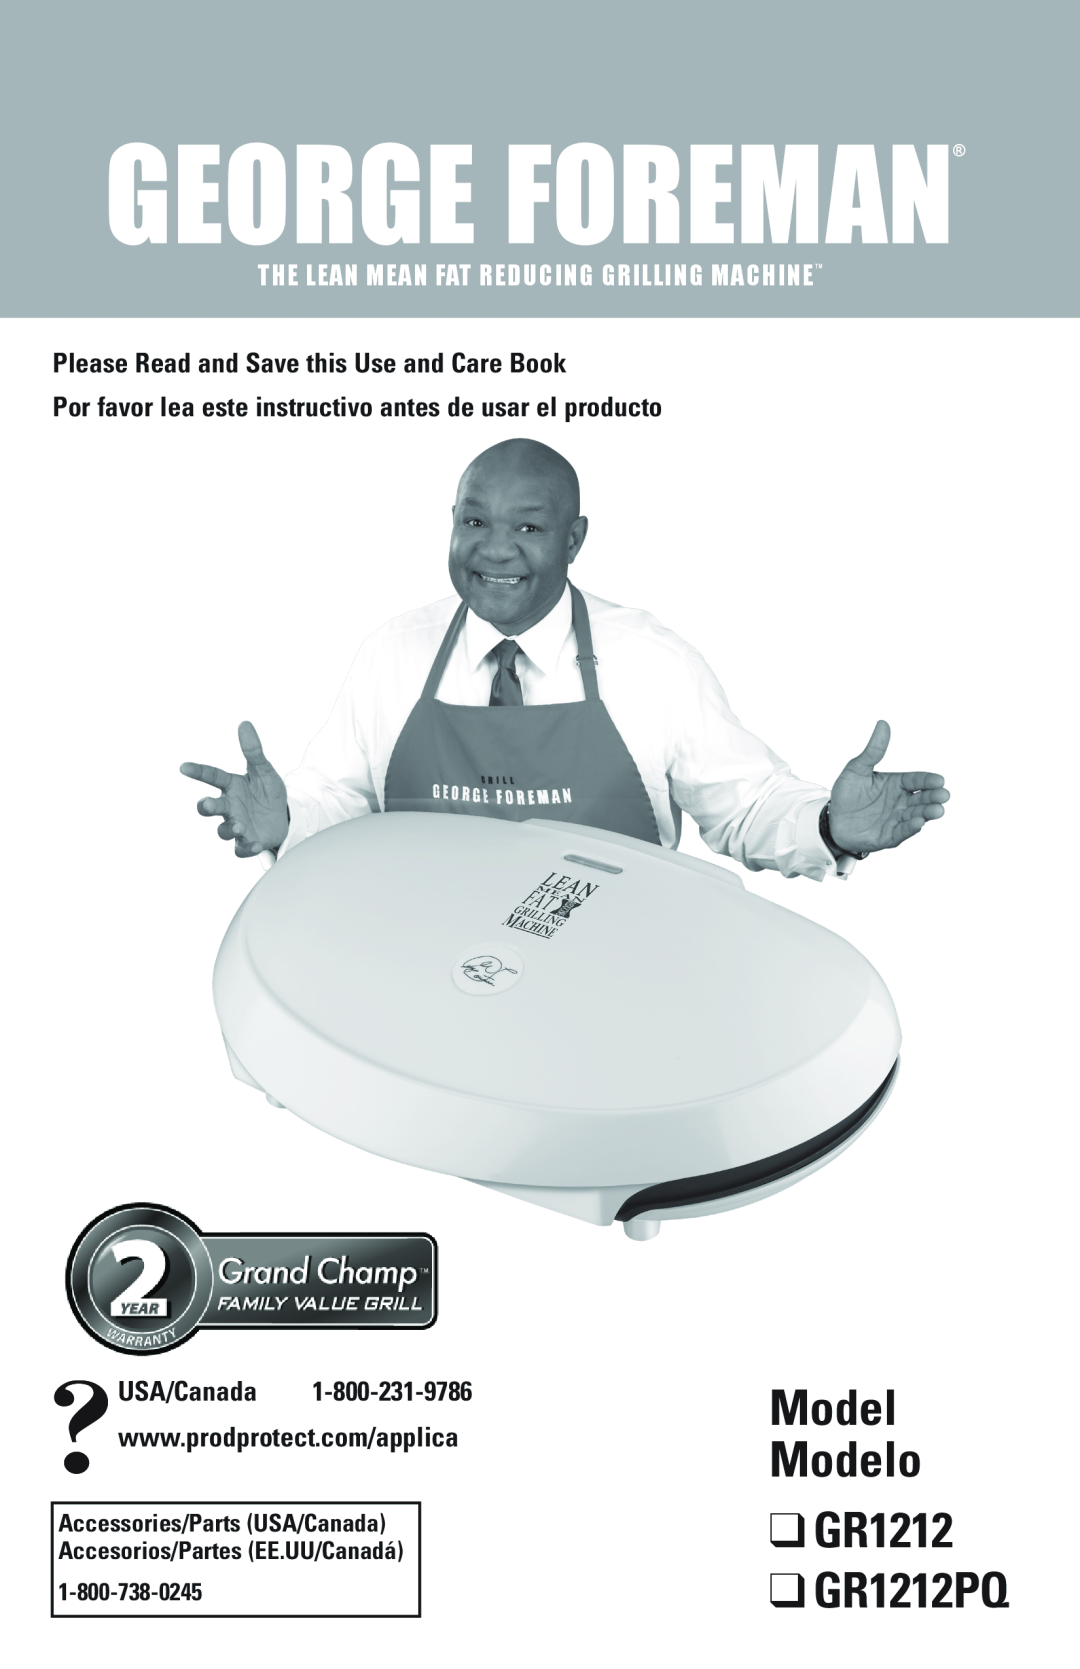 George Foreman manual Model Modelo GR1212 GR1212PQ, The Lean Mean Fat Reducing Grilling Machinetm 